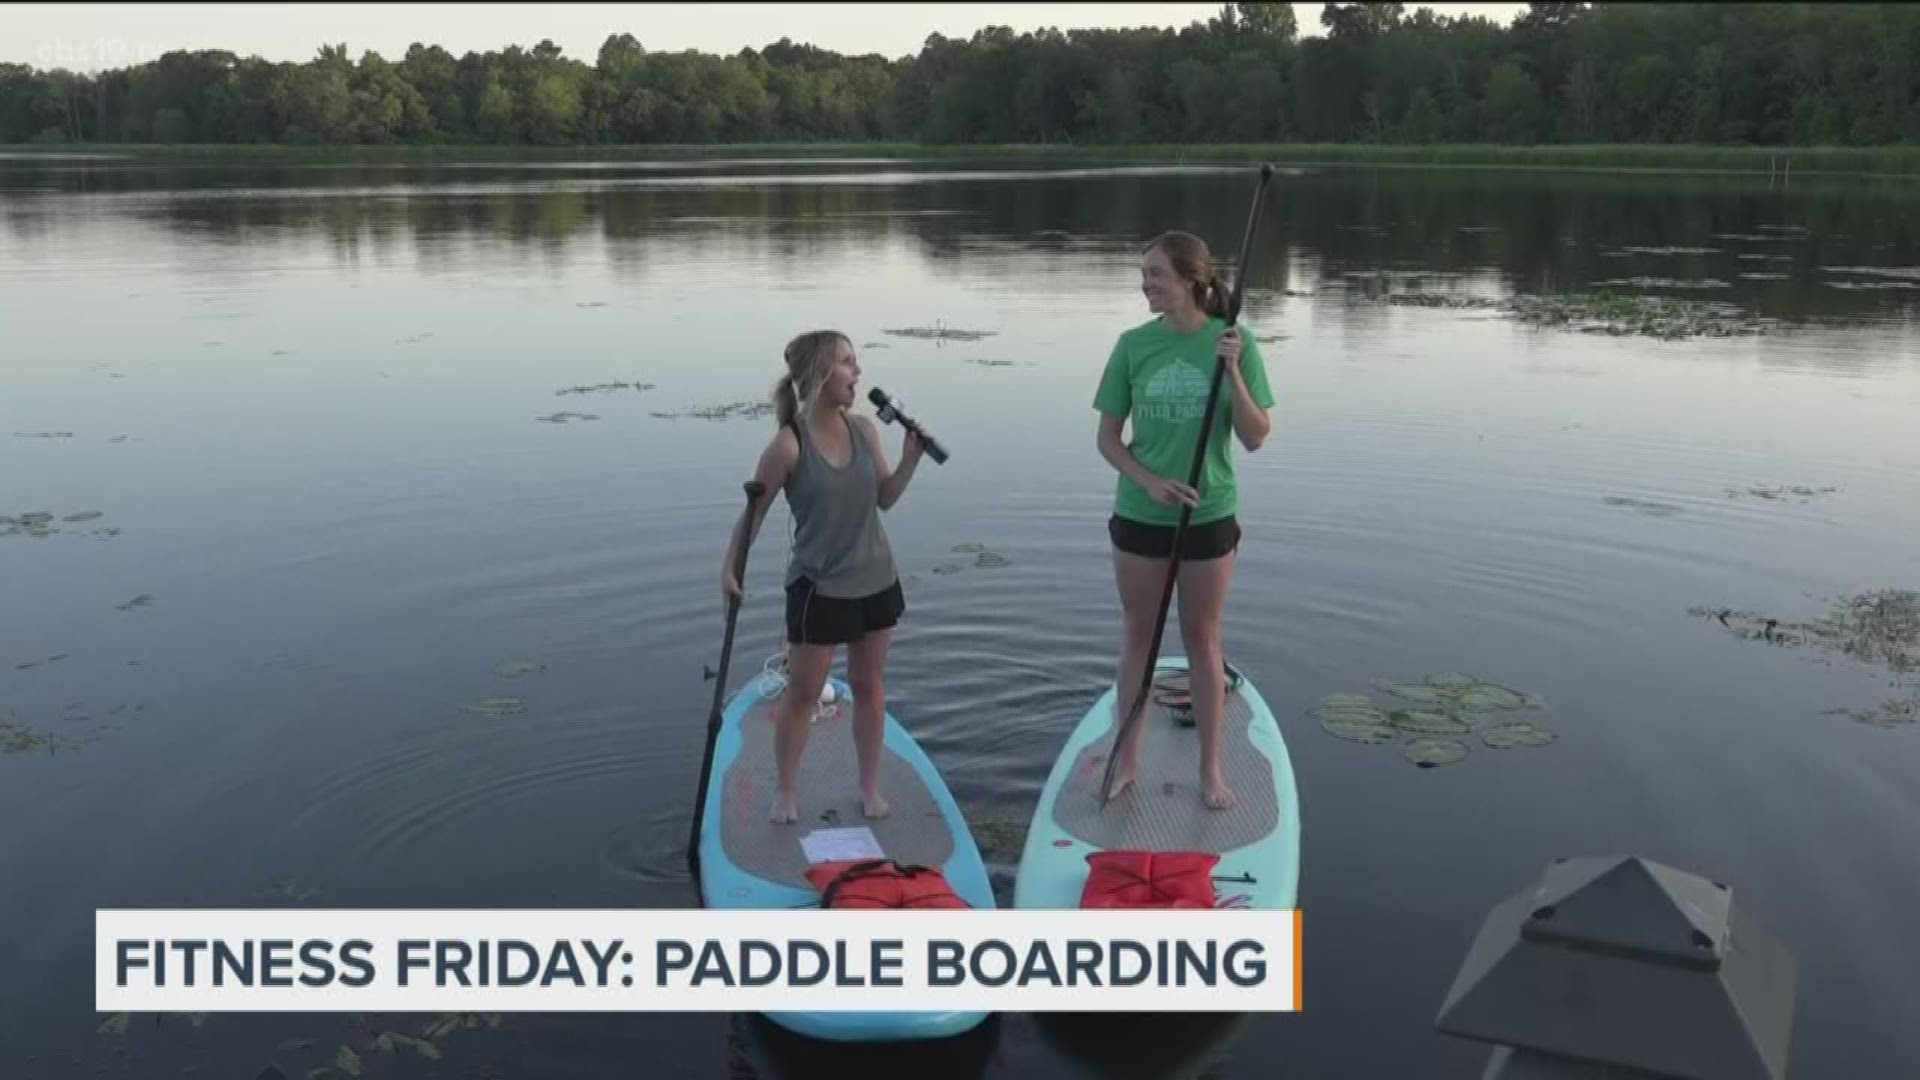 Paddle Boarding helps not only physical fitness but mental fitness as well!